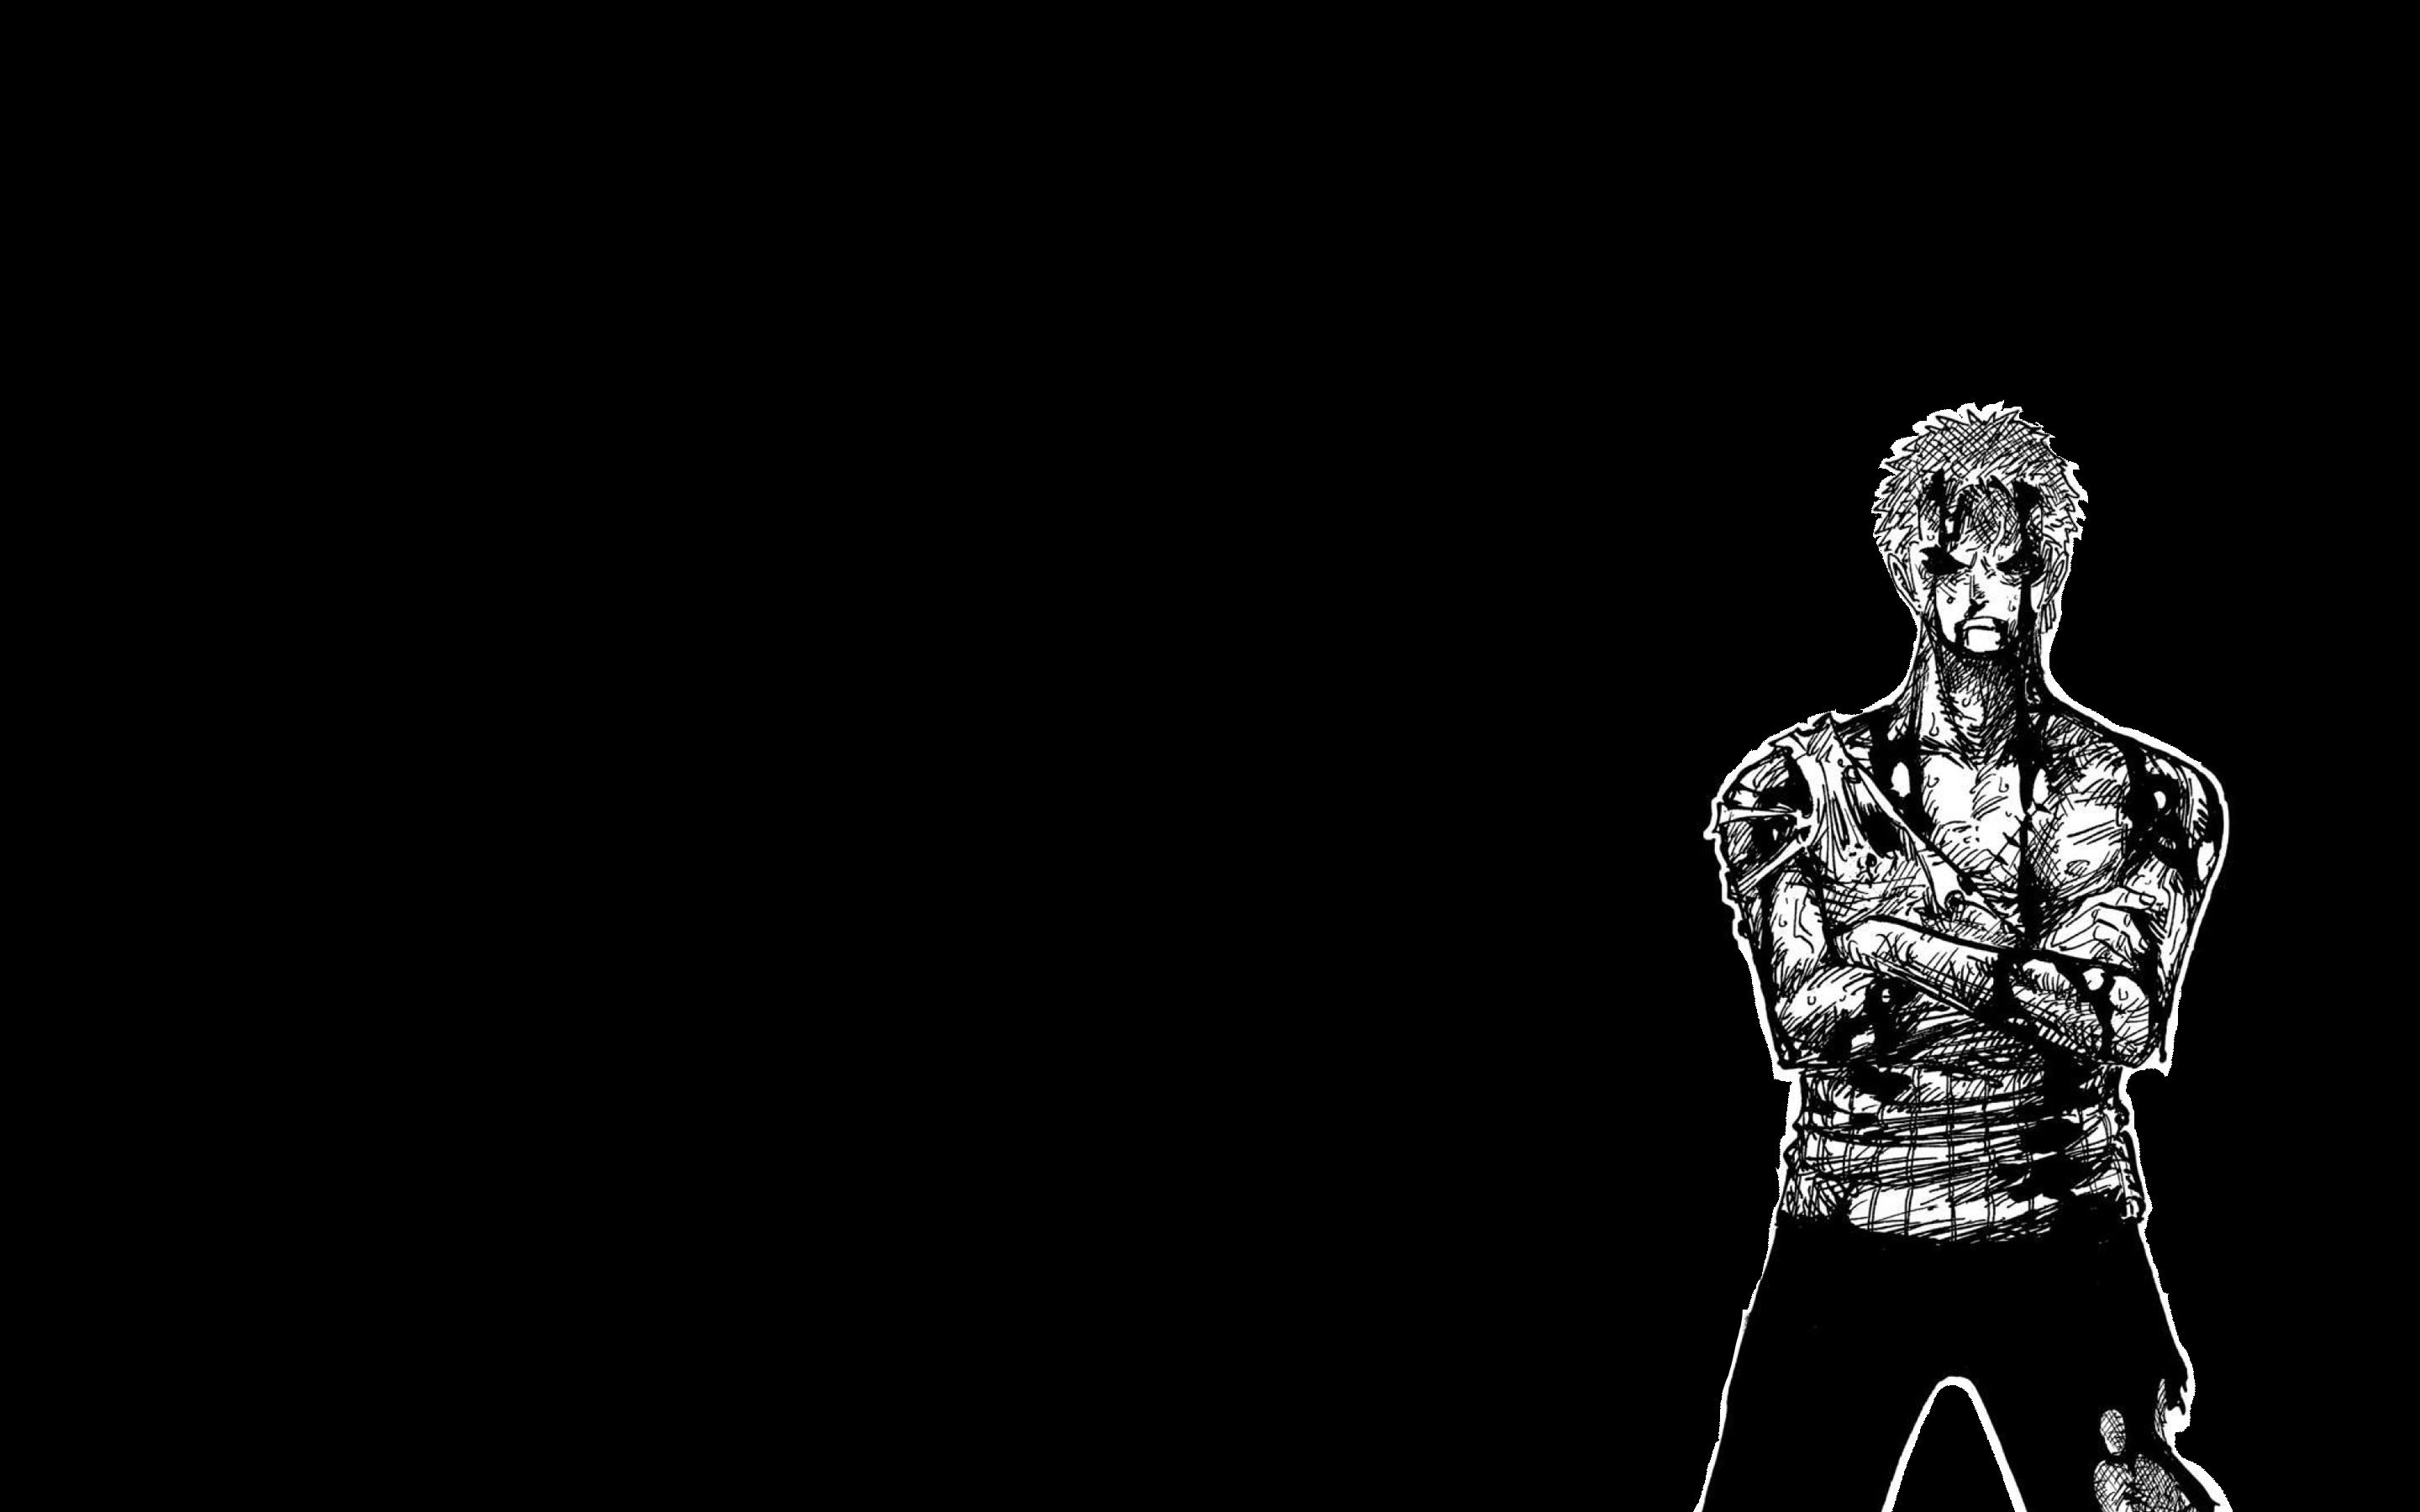 First try at Manga Panel Cutout Wallpaper Happened. Let me know how it turned out and any tips